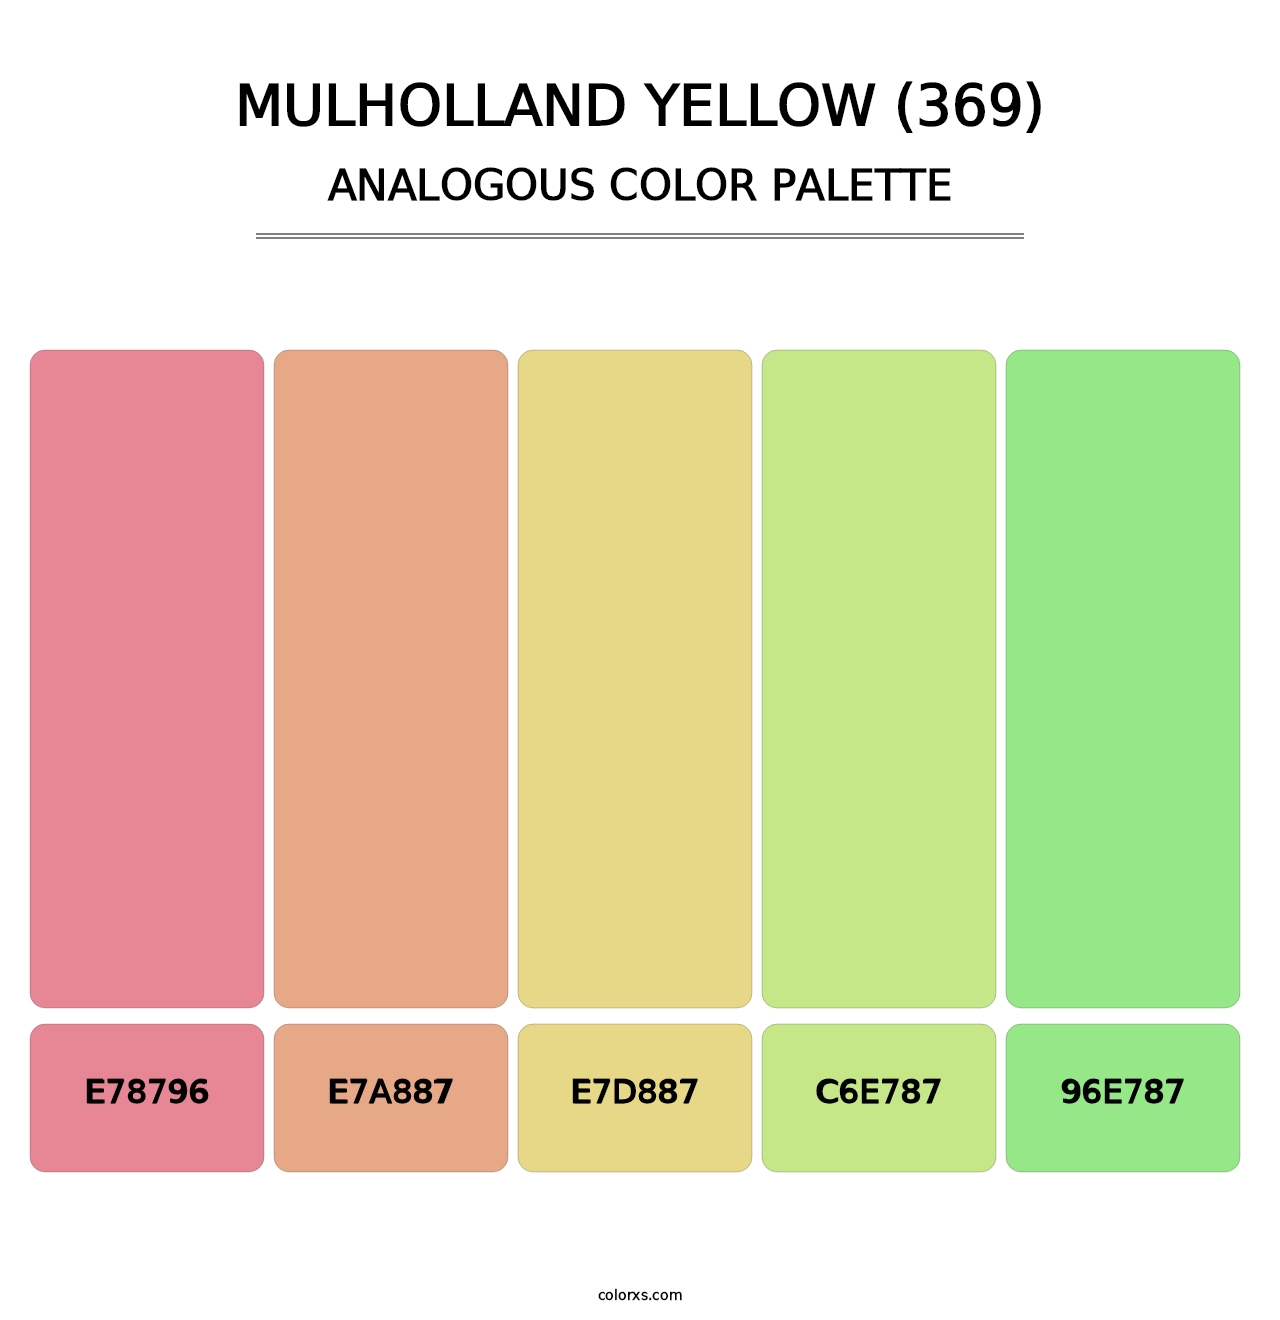 Mulholland Yellow (369) - Analogous Color Palette